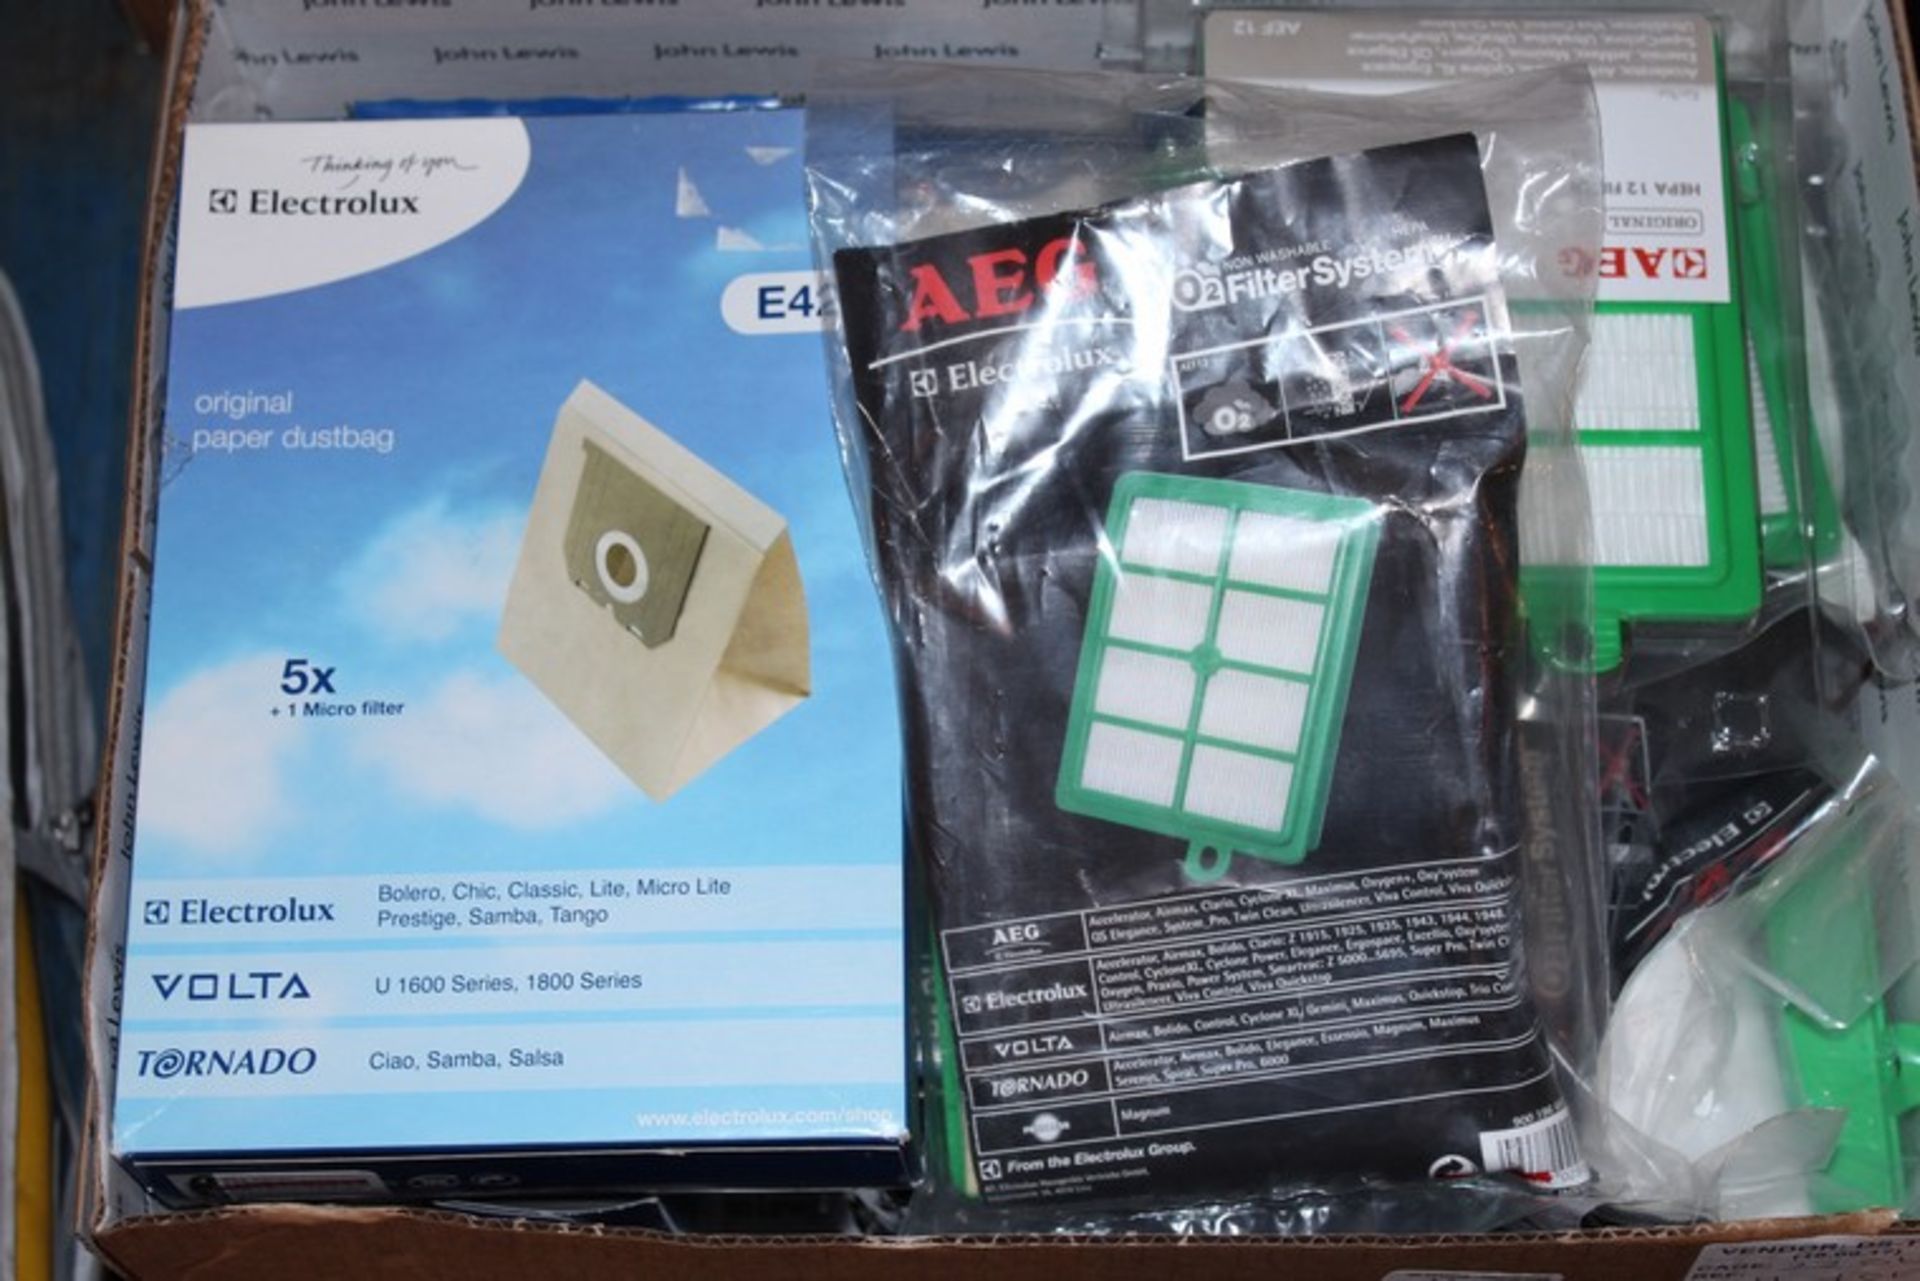 11 x BOXED AND UNBOXED ASSORTED AEG ITEMS TO INCLUDE FILTER SYSTEMS AND ORIGINAL PAPER DUST BAGS (